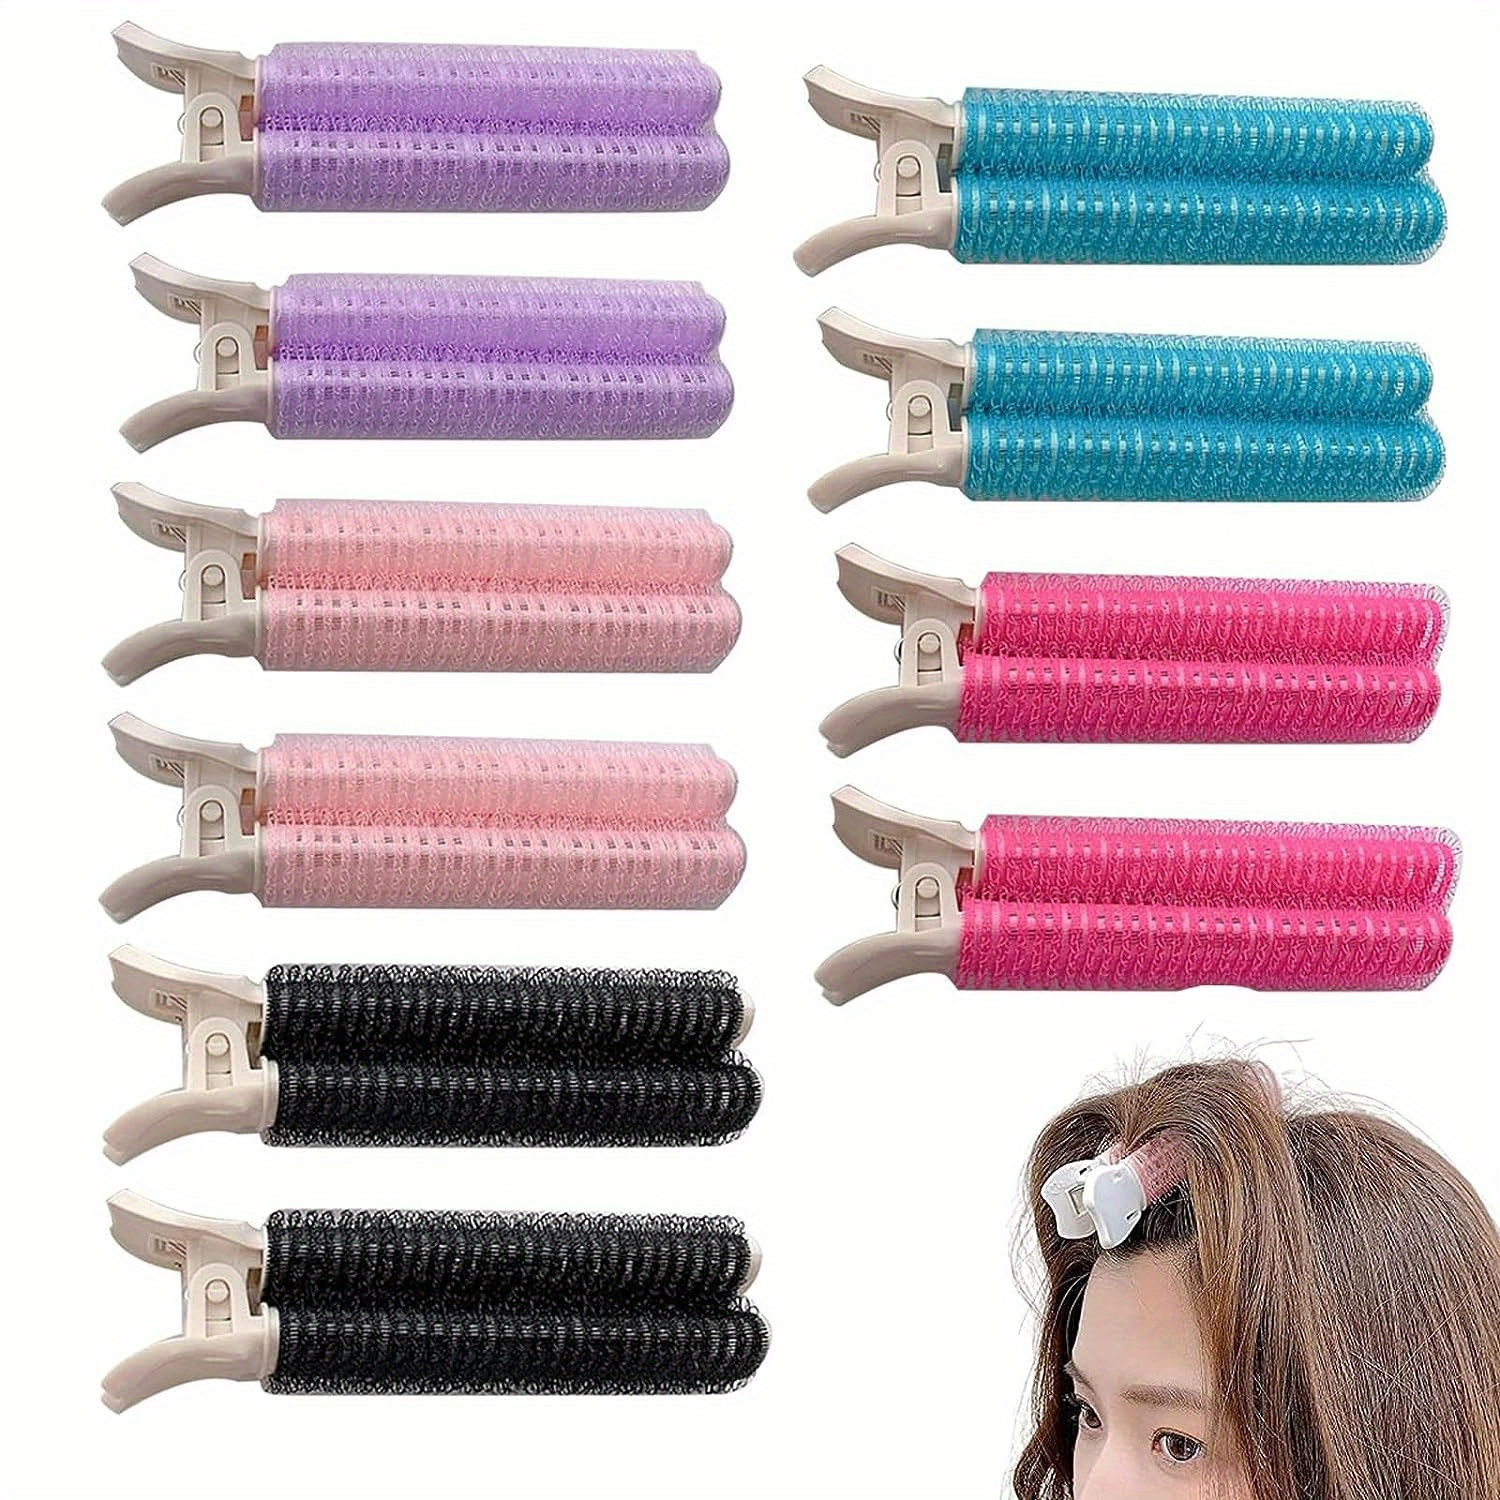 6pcs/set Barber Hair Grippers Magic Hair Stickers Tape Hairpins Hair Accessories for Hair Styling Sectioning and Coloring, Hairdressing Supplies